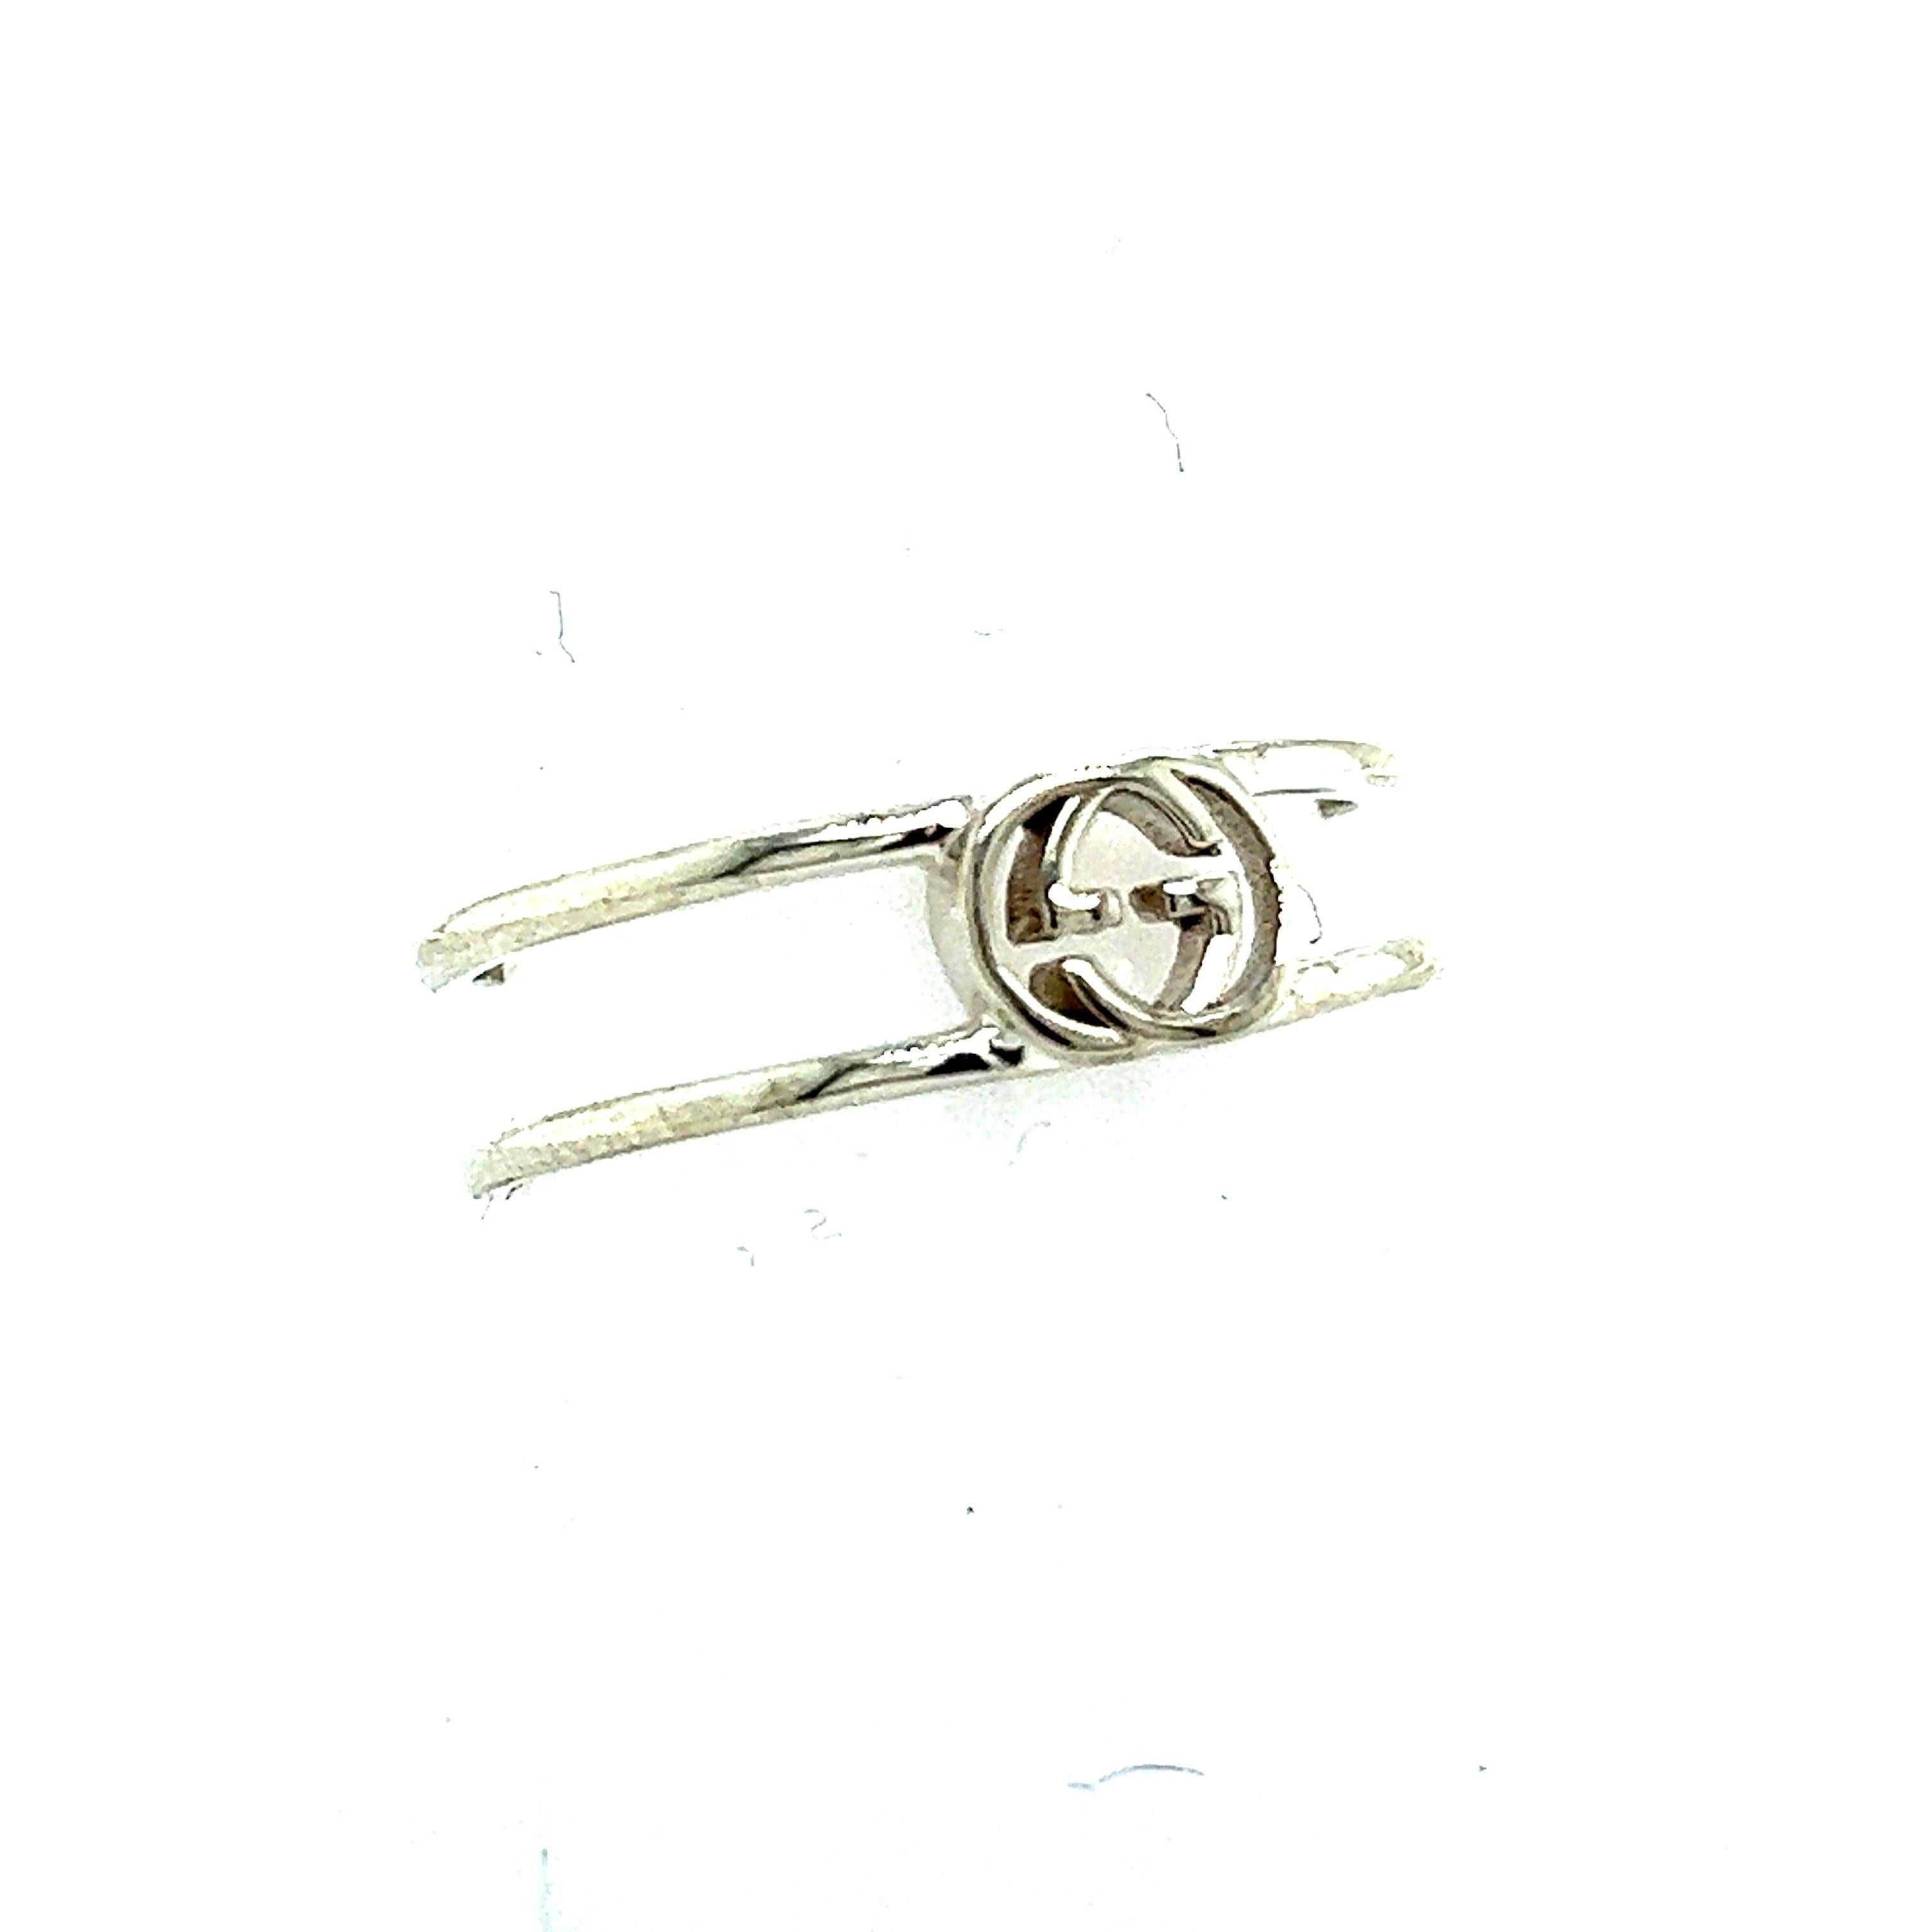 Authentic Gucci Estate Ladies Ring Size 9 Sterling Silver G4

This elegant Authentic Gucci ring is made of sterling silver and has a weight of 2.05 grams.

MADE IN ITALY

TRUSTED SELLER SINCE 2002

PLEASE SEE OUR HUNDREDS OF POSITIVE FEEDBACKS FROM